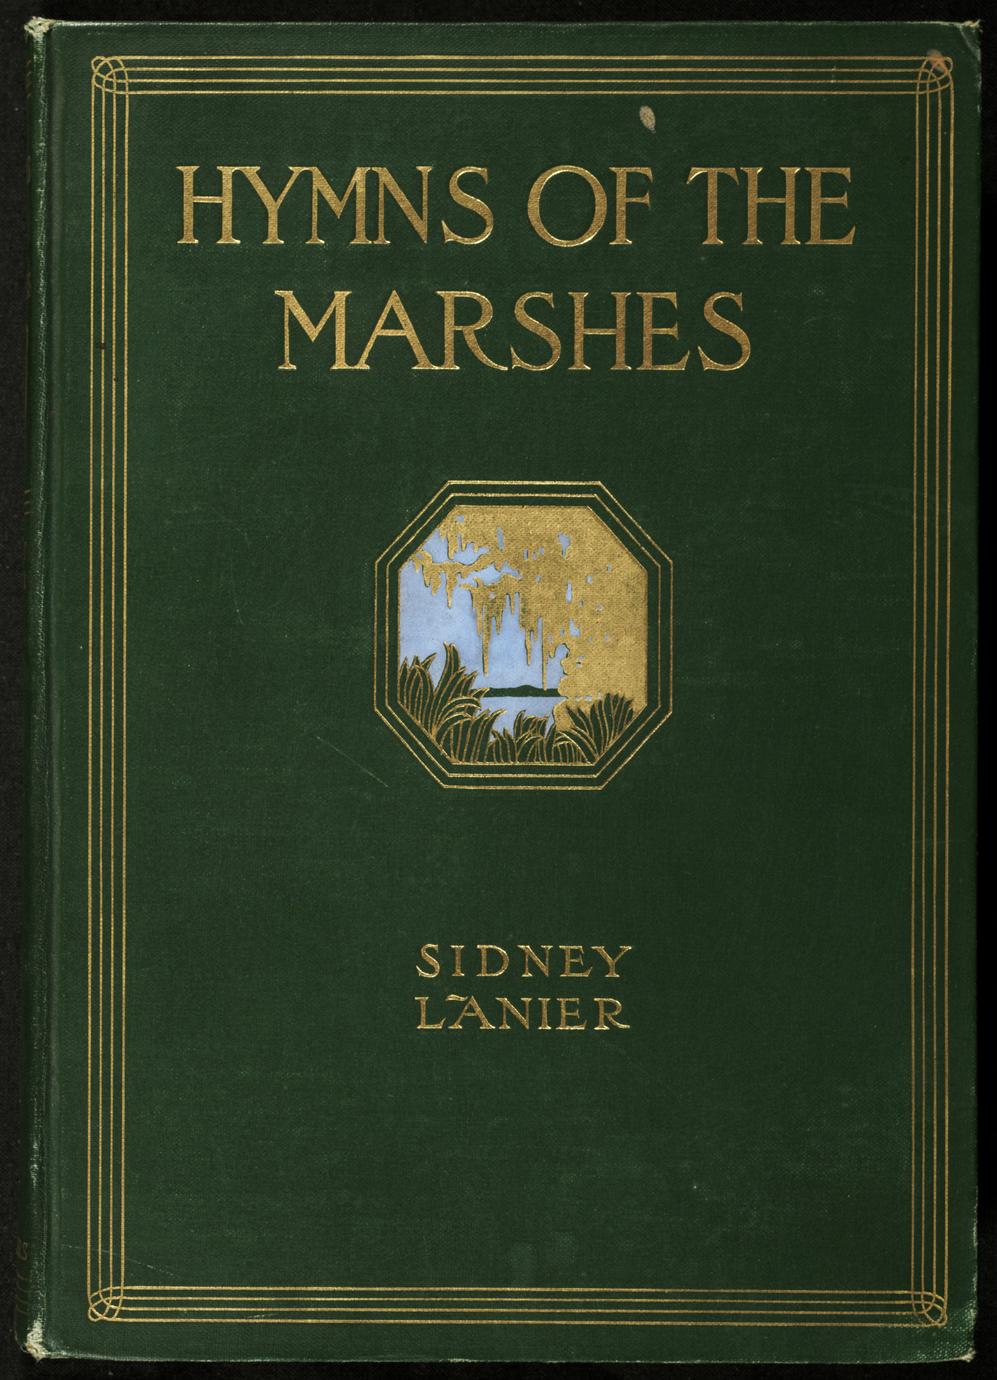 Hymns of the marshes (1 of 2)